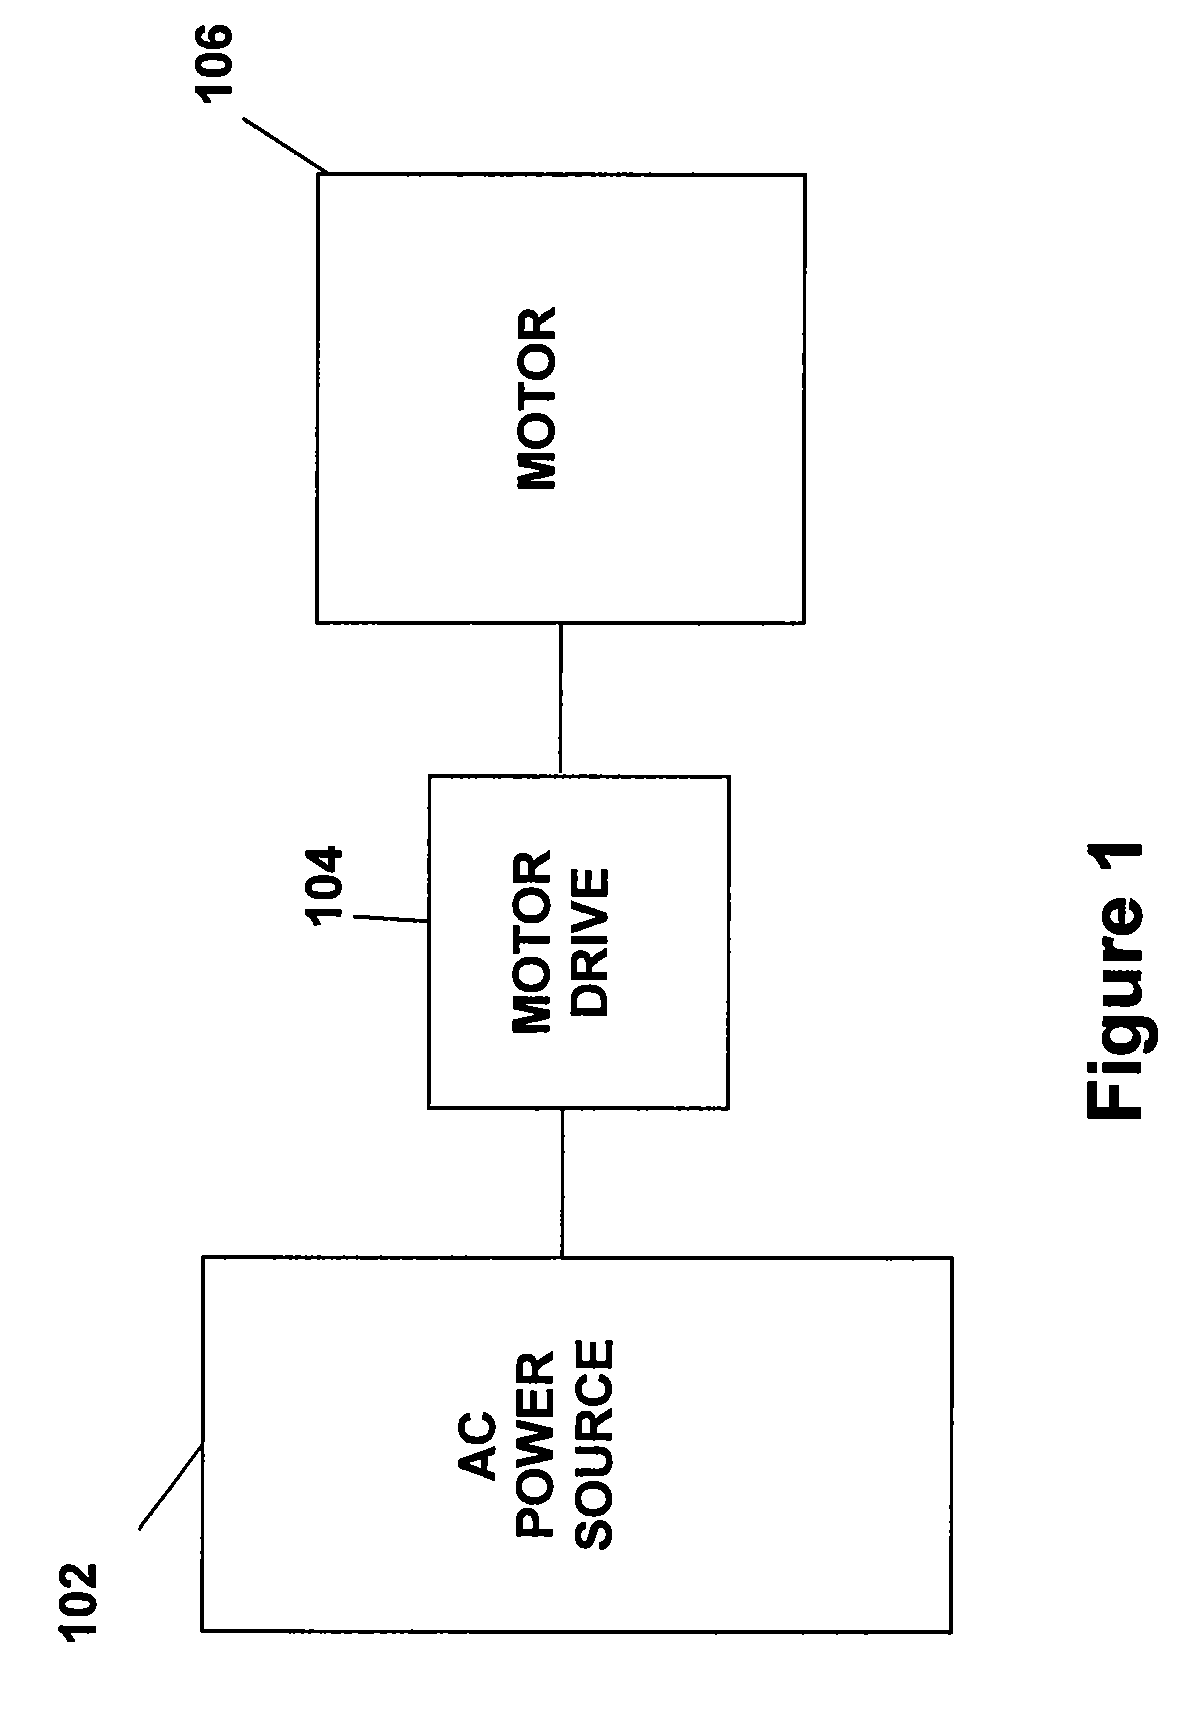 System and method for compressor capacity modulation in a heat pump